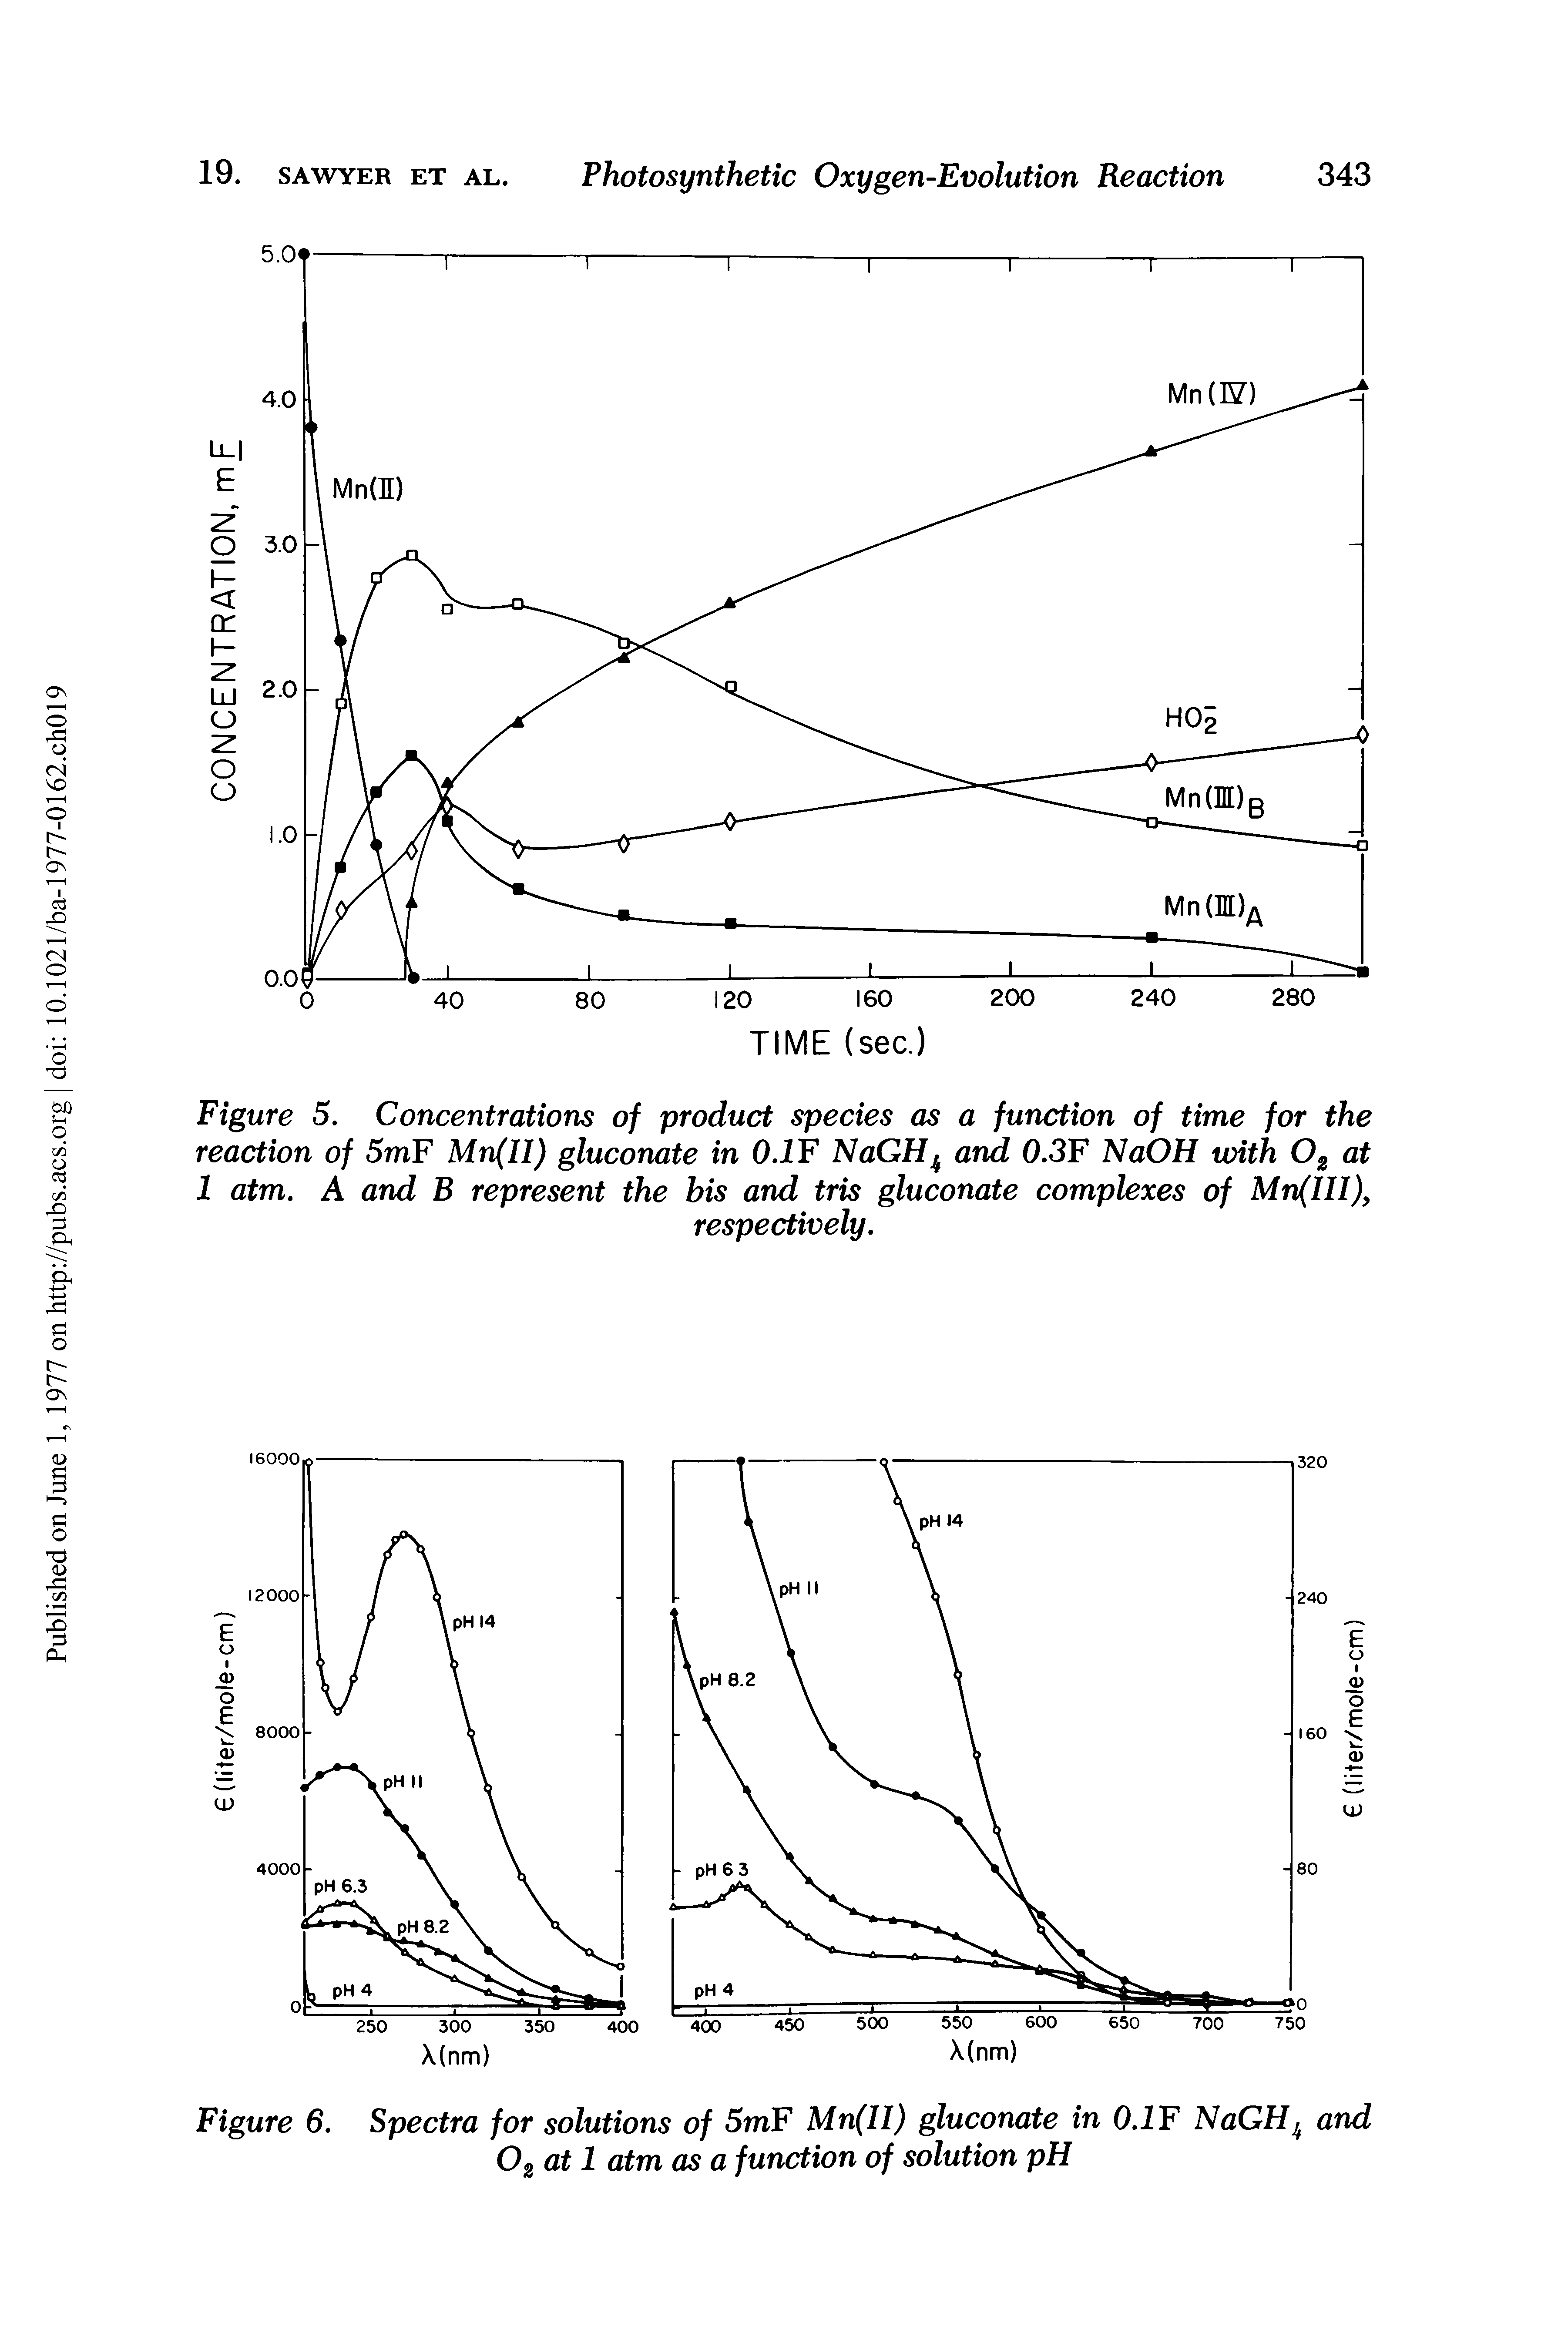 Figure 5. Concentrations of product species as a function of time for the reaction of 5mF Mn(II) gluconate in 0.1 F NaGHk and 0.3F NaOH with 02 at 1 atm. A and B represent the bis and tris gluconate complexes of Mn(lll),...